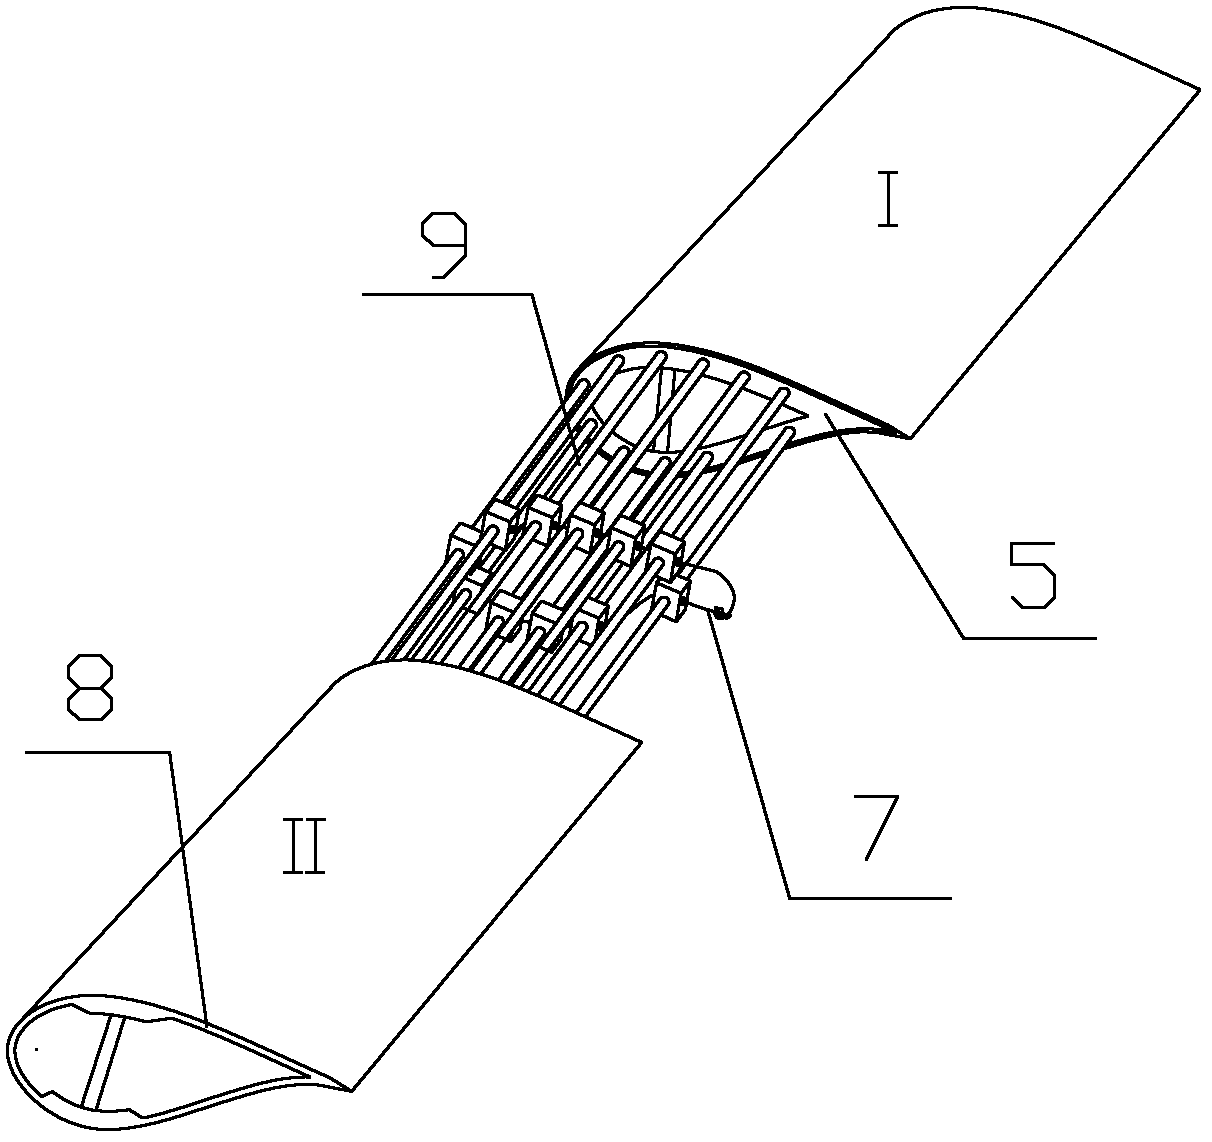 Subsection blade of wind turbine and assembling method thereof